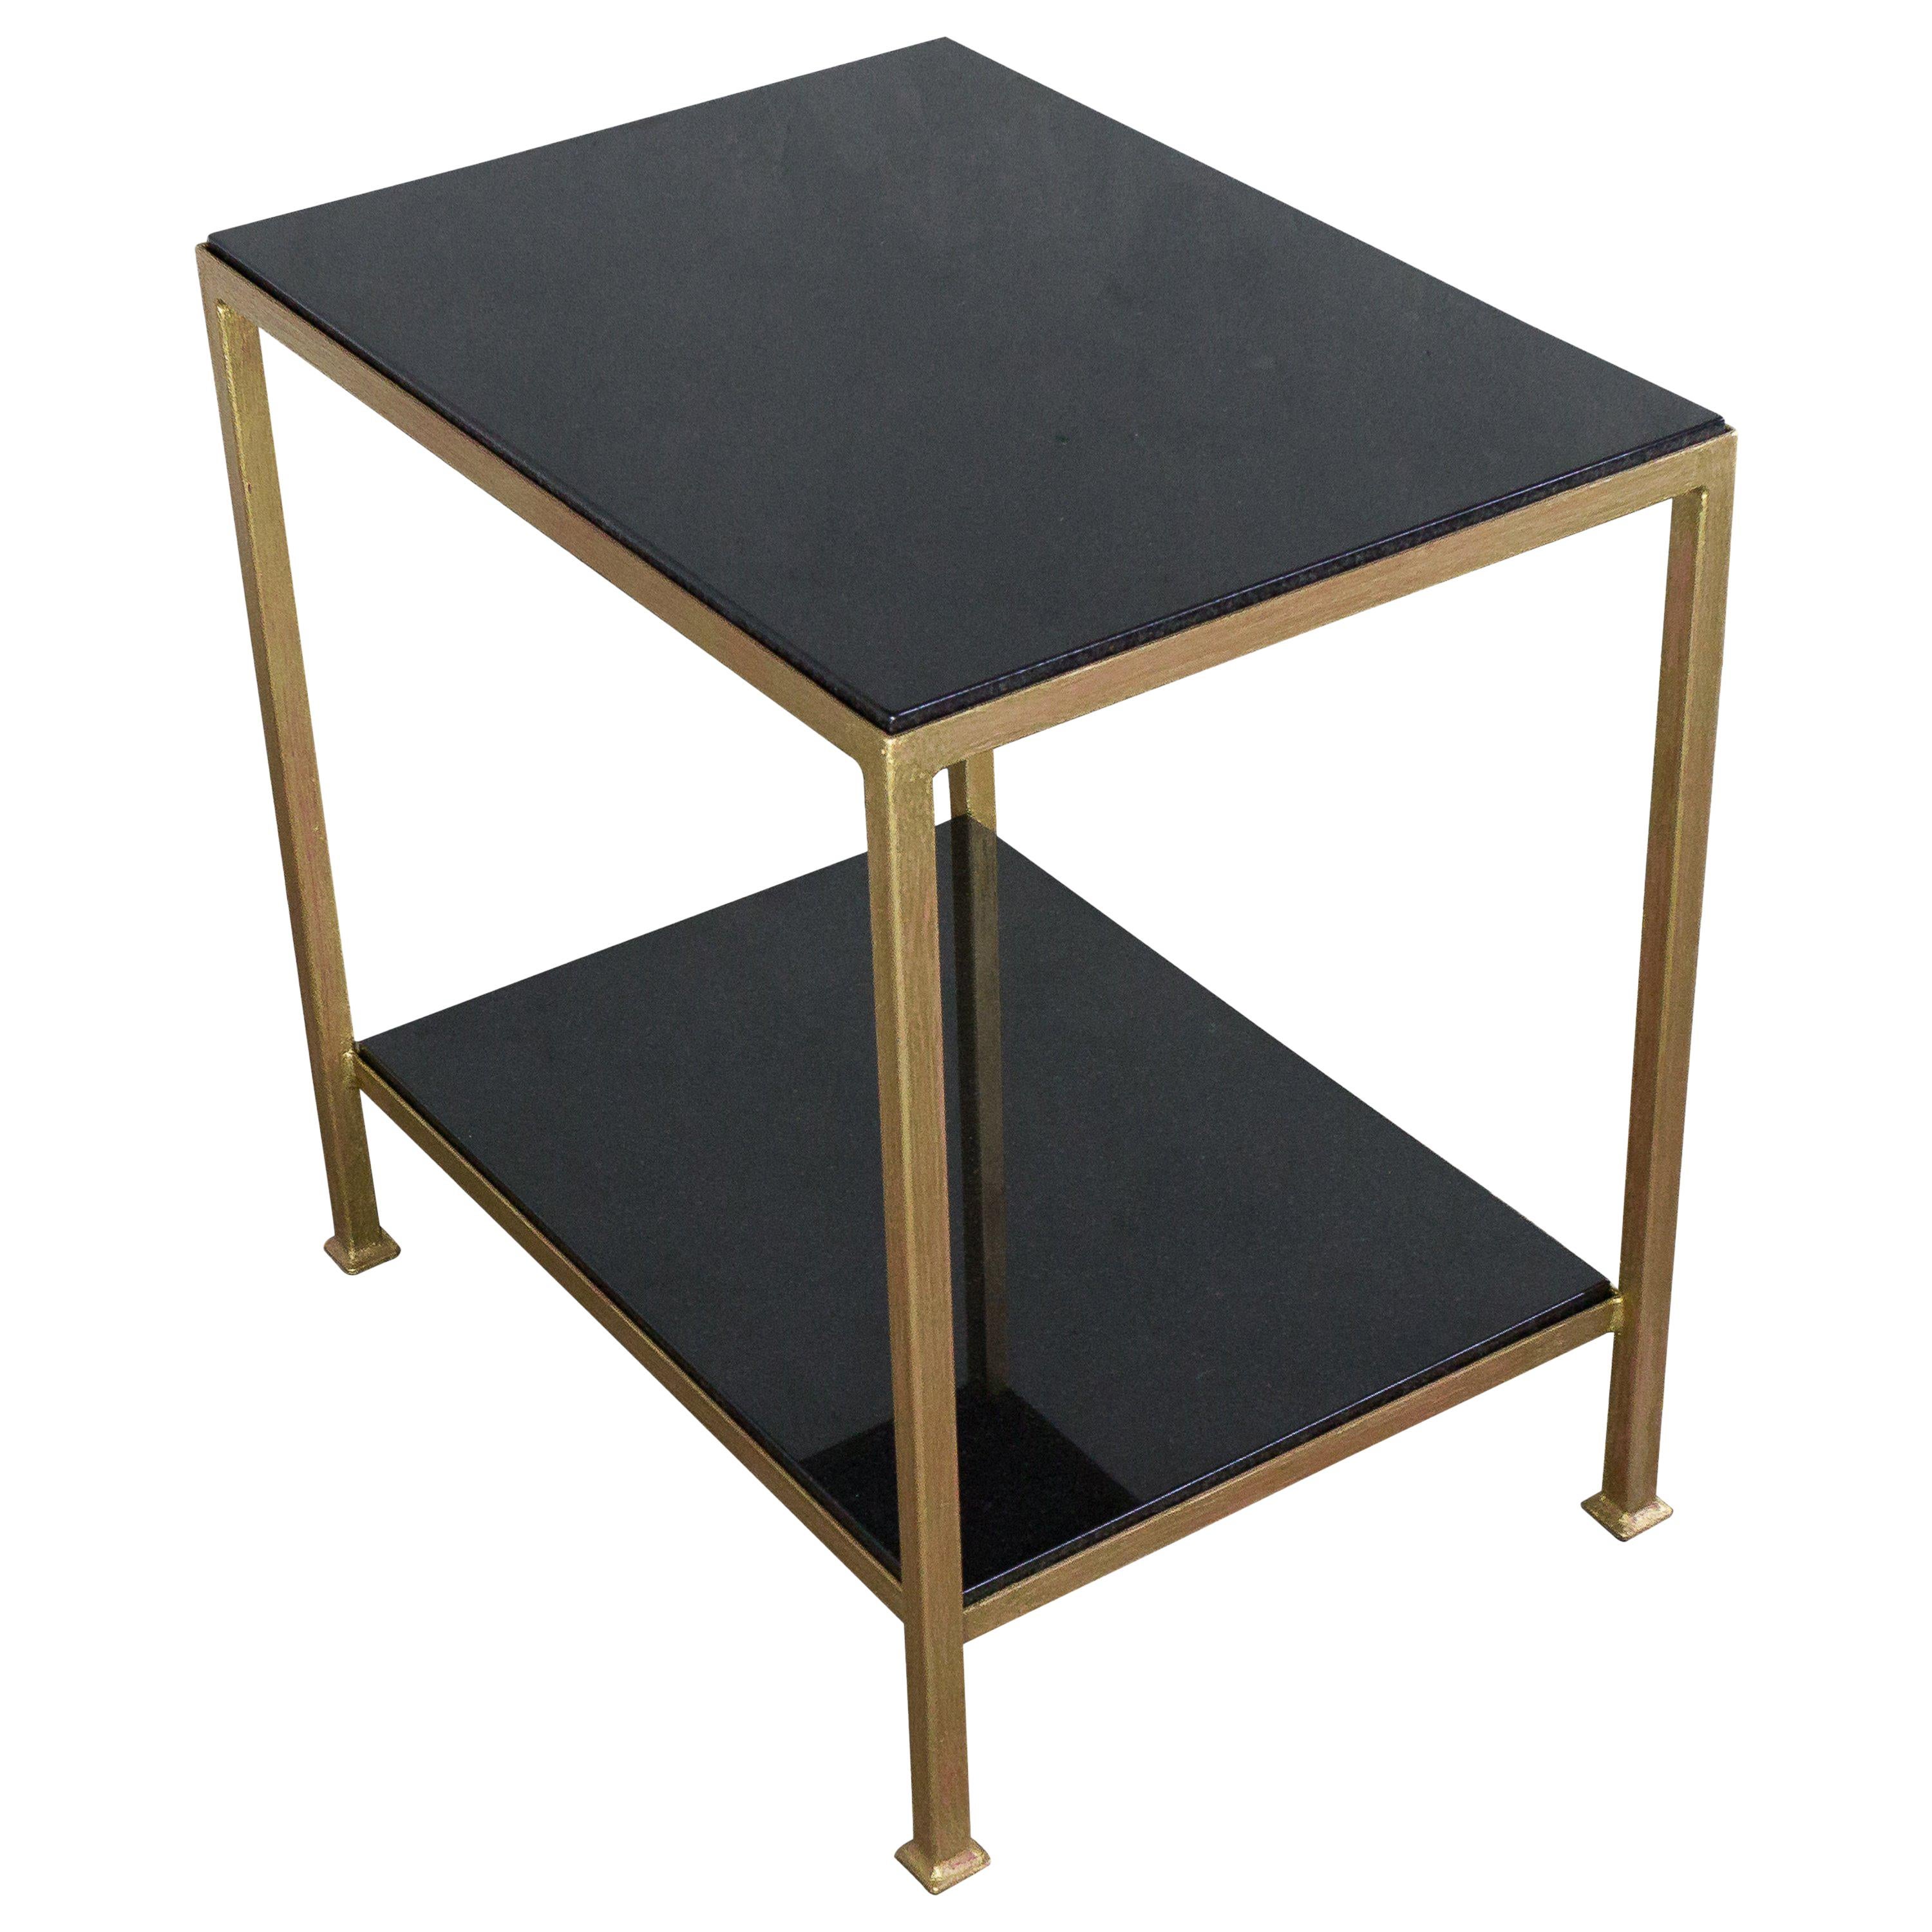 Marcelo Iron End Table with Polished Granite Surface